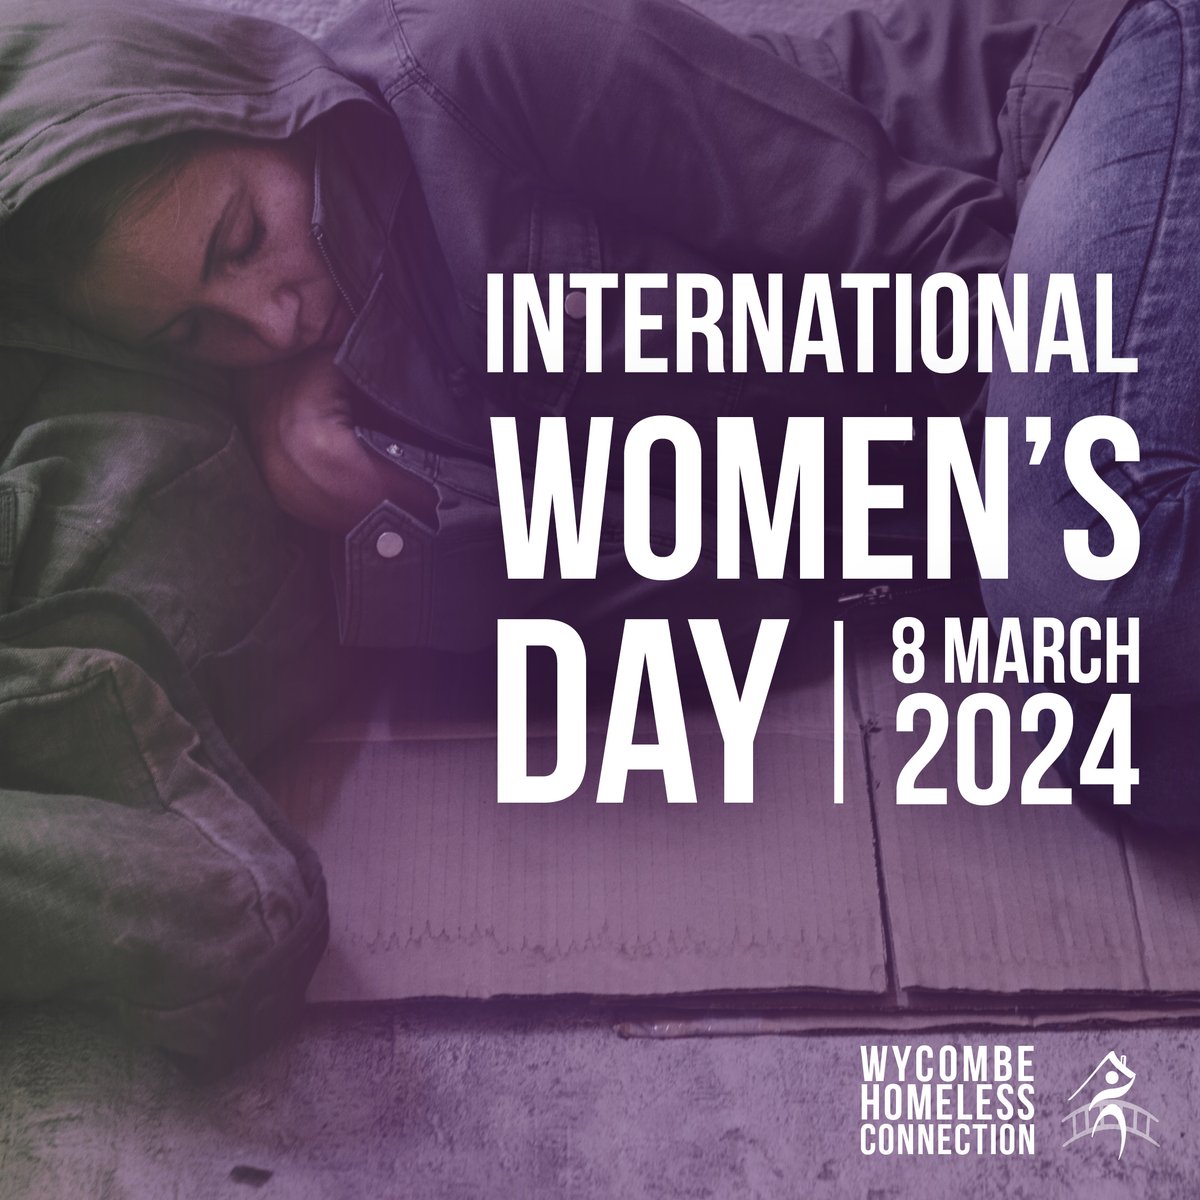 One third of the people we serve are women. Women who are homeless are far more likely to suffer abuse and violence. Our Support Centre is a safe place for women. Our staff are trauma informed and there are always female members of staff. #IWD2024 #InspireInclusion